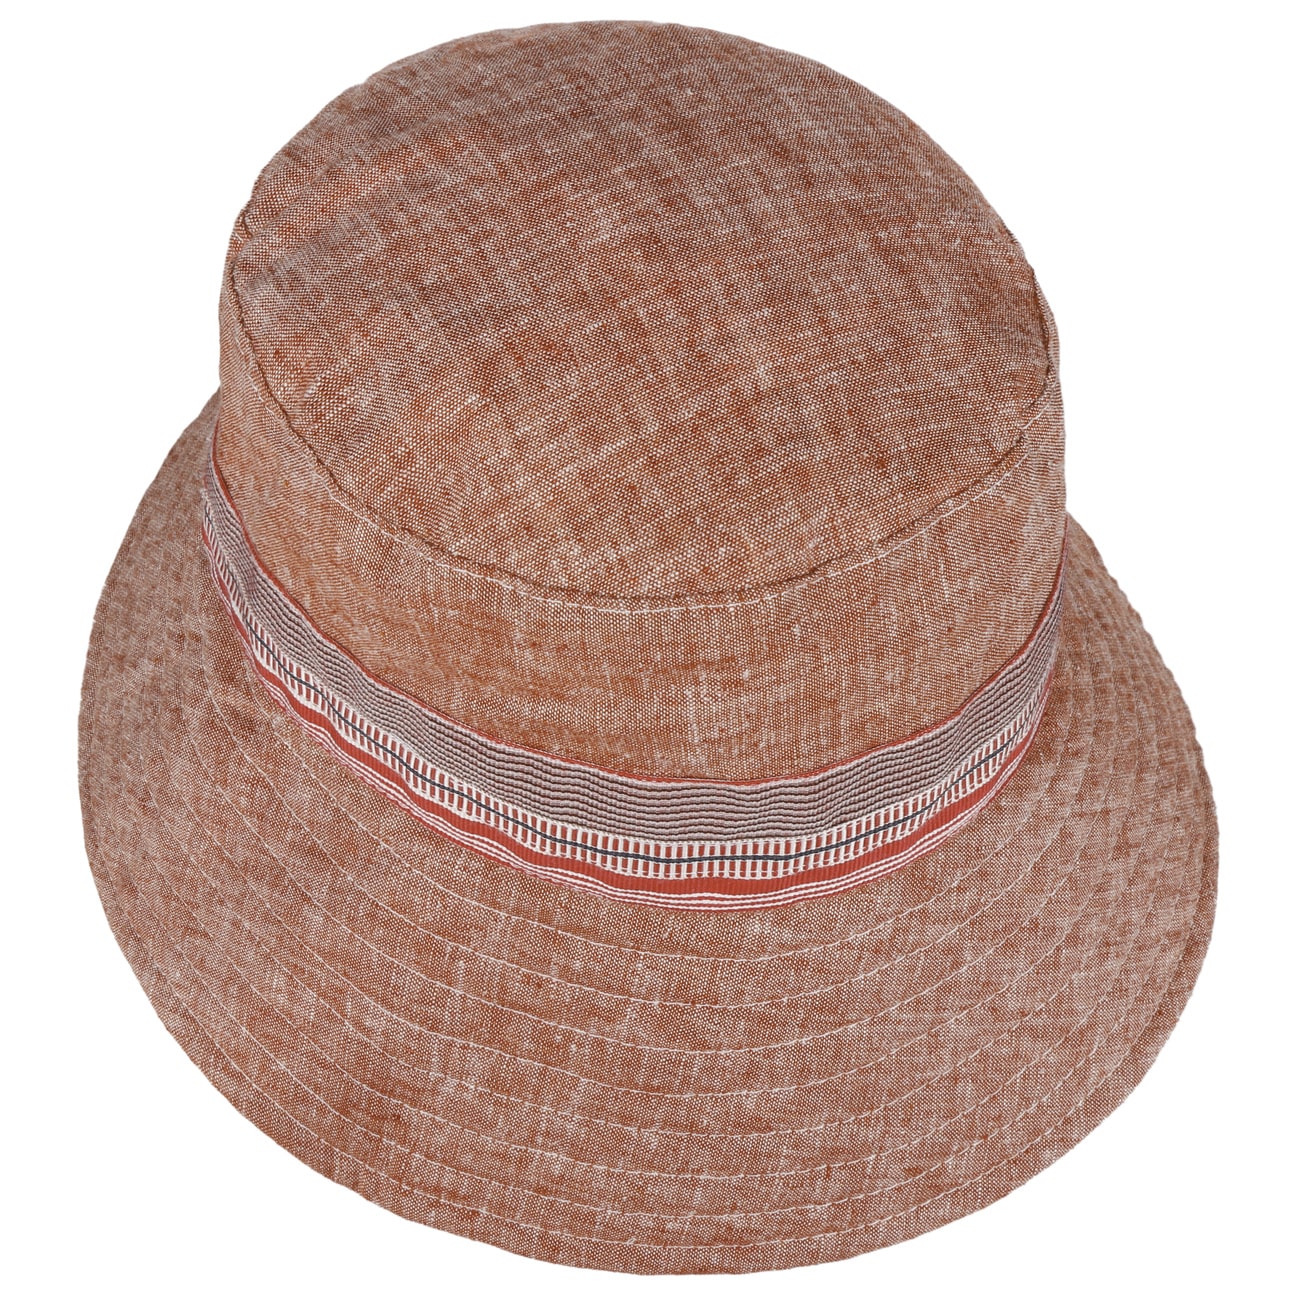 Luvisa Bonnet by bedacht - 72,95 €